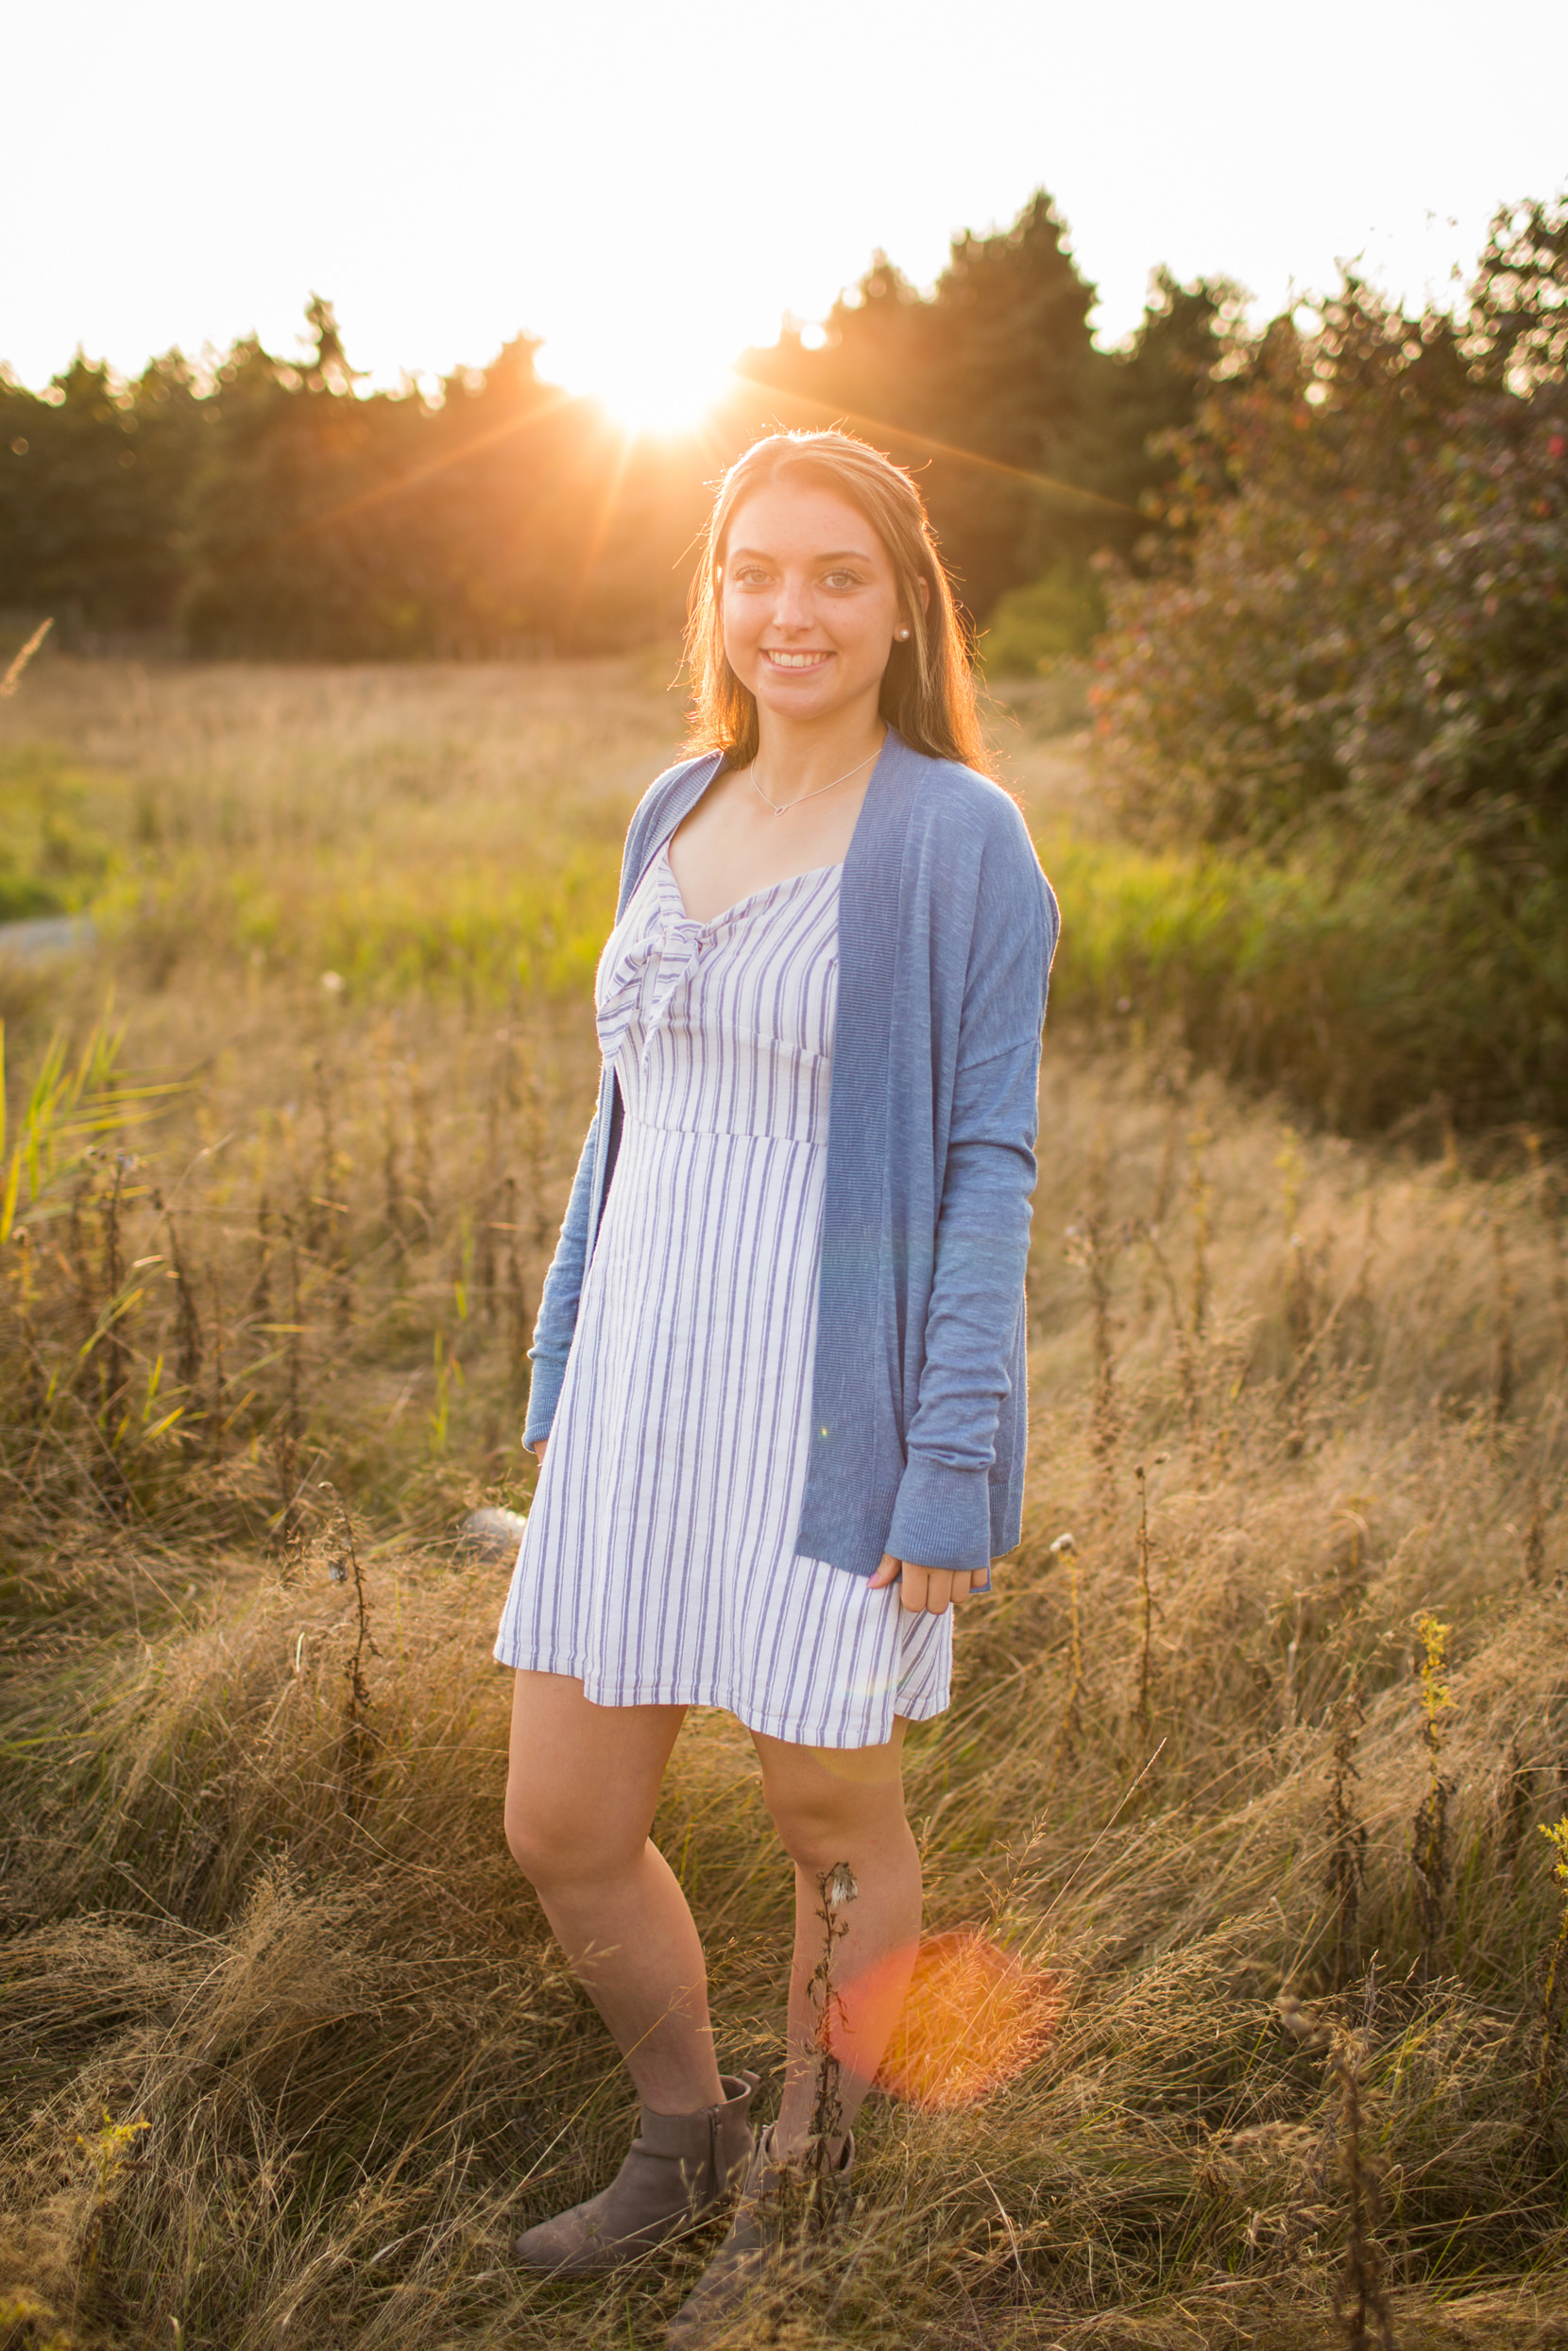 South Whidbey Senior Portraits